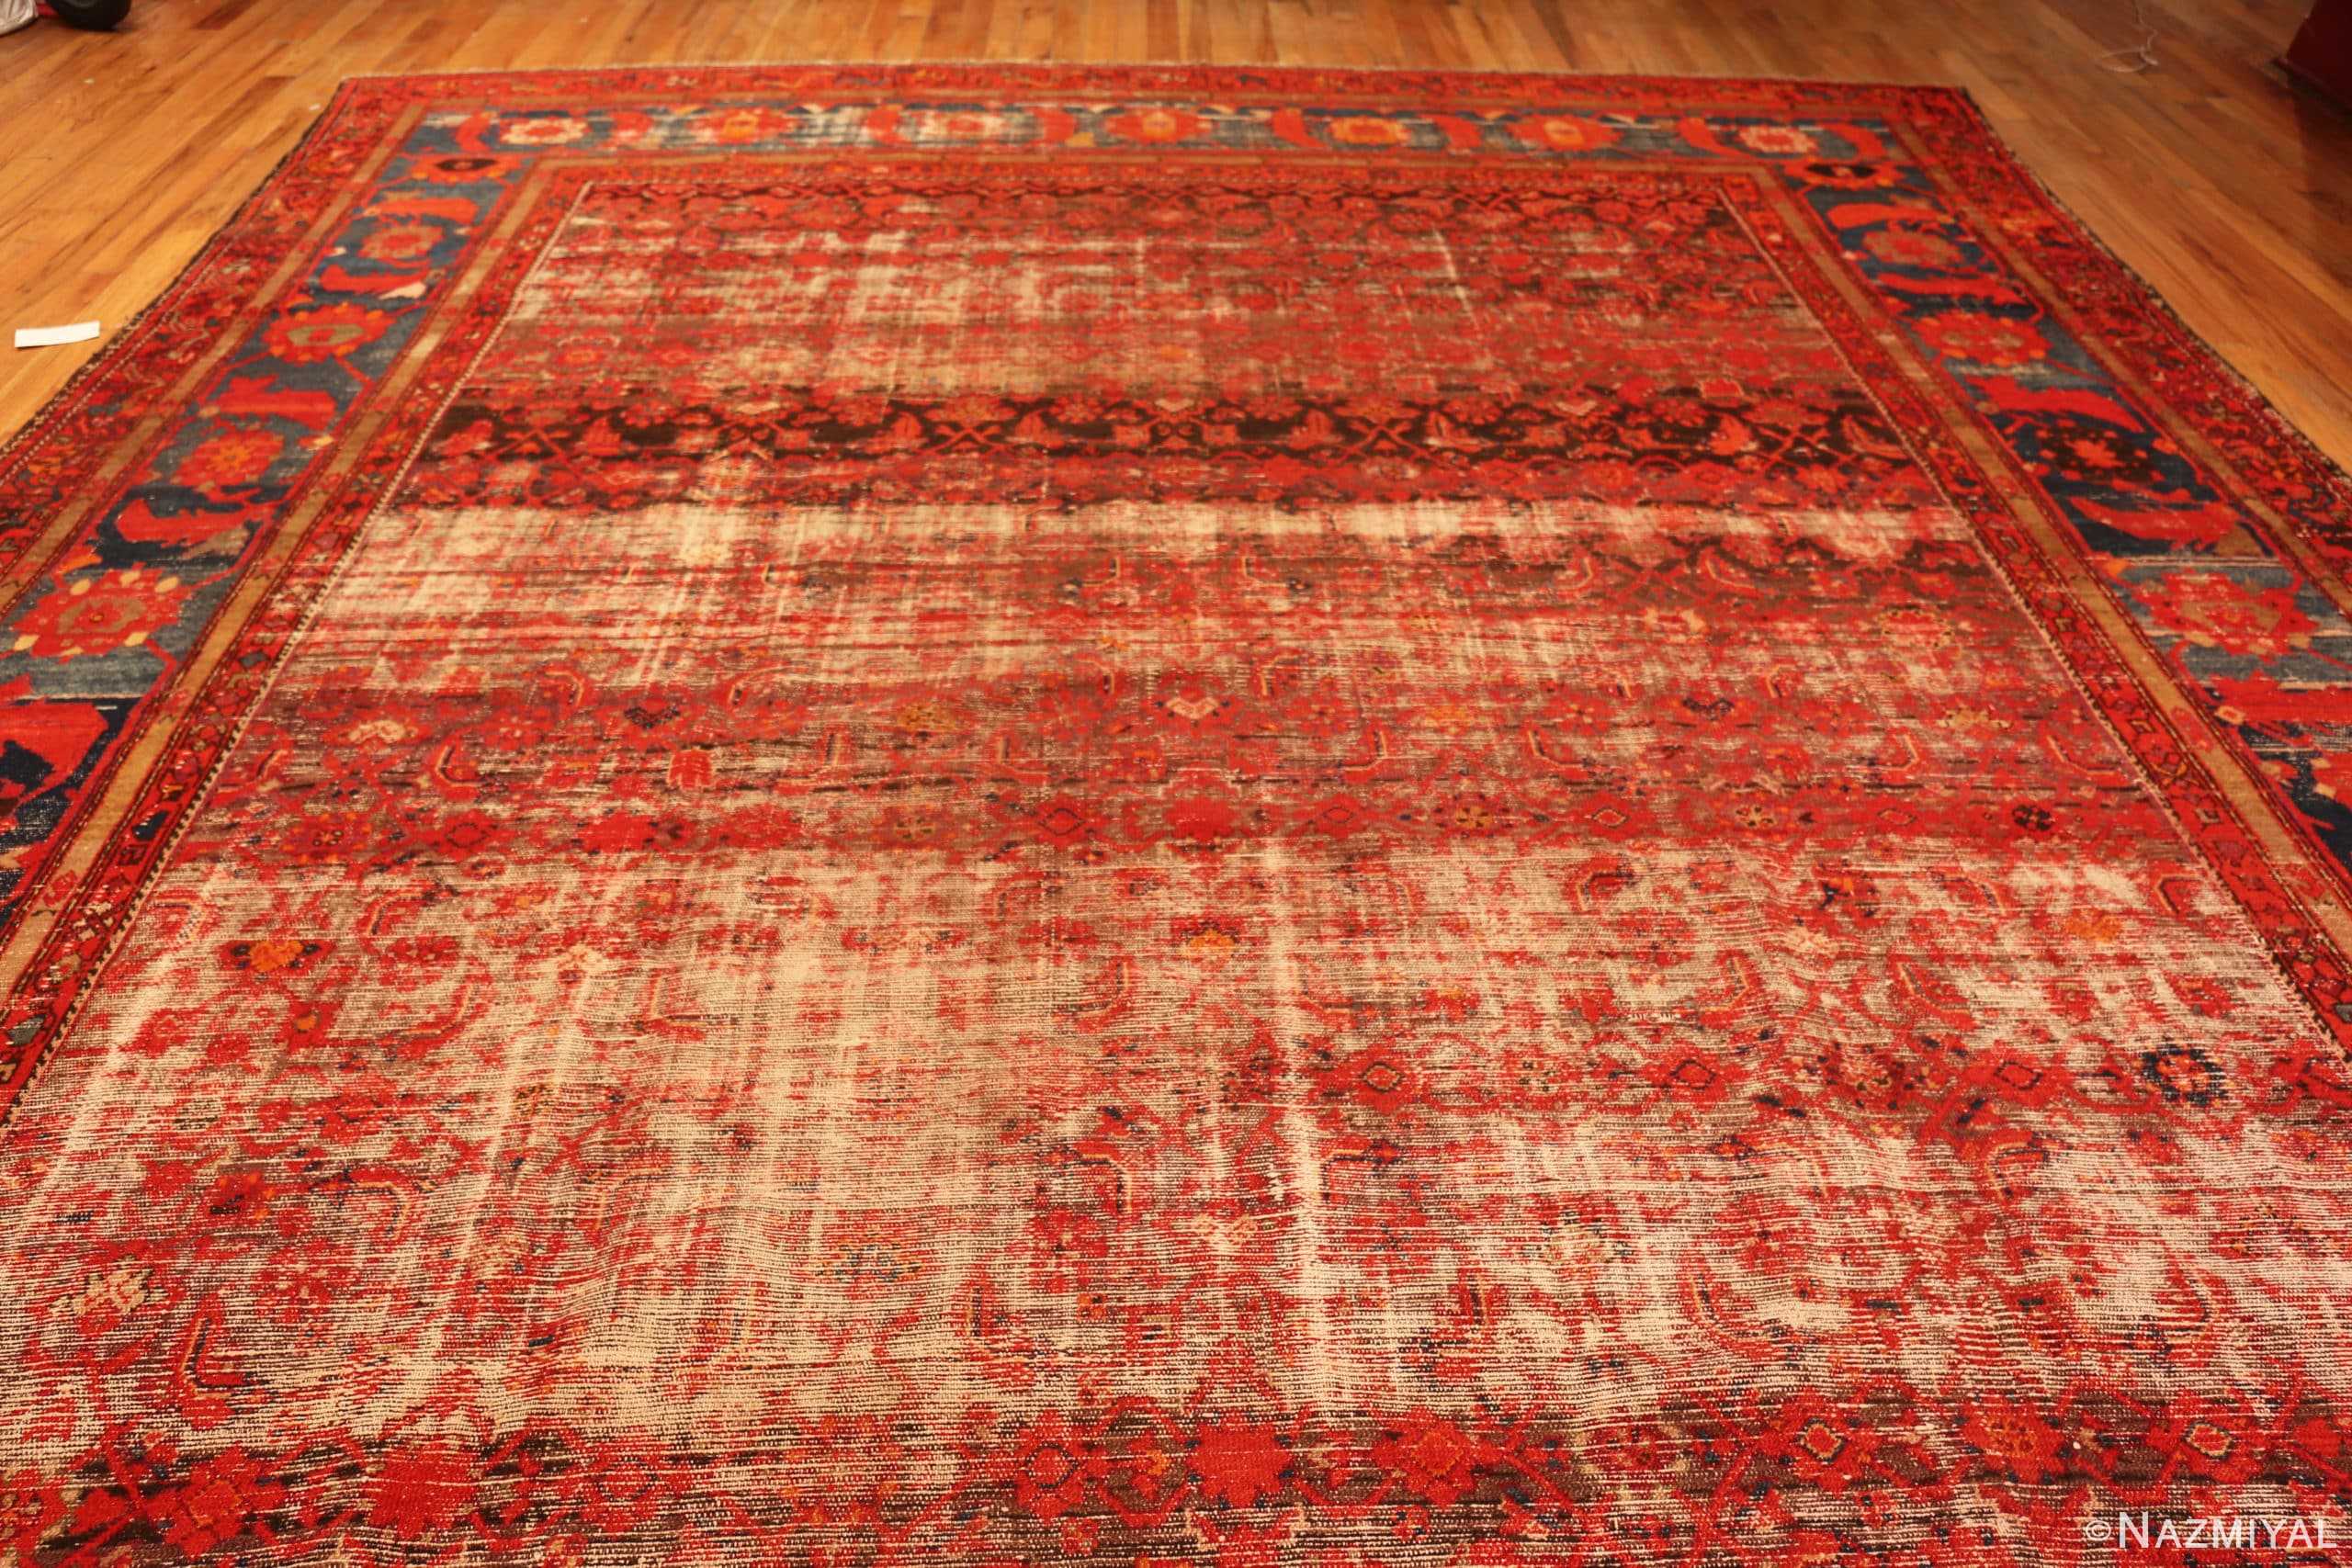 Whole View Of Large Shabby Chic Antique Persian Malayer Rug 71297 by Nazmiyal Antique Rugs